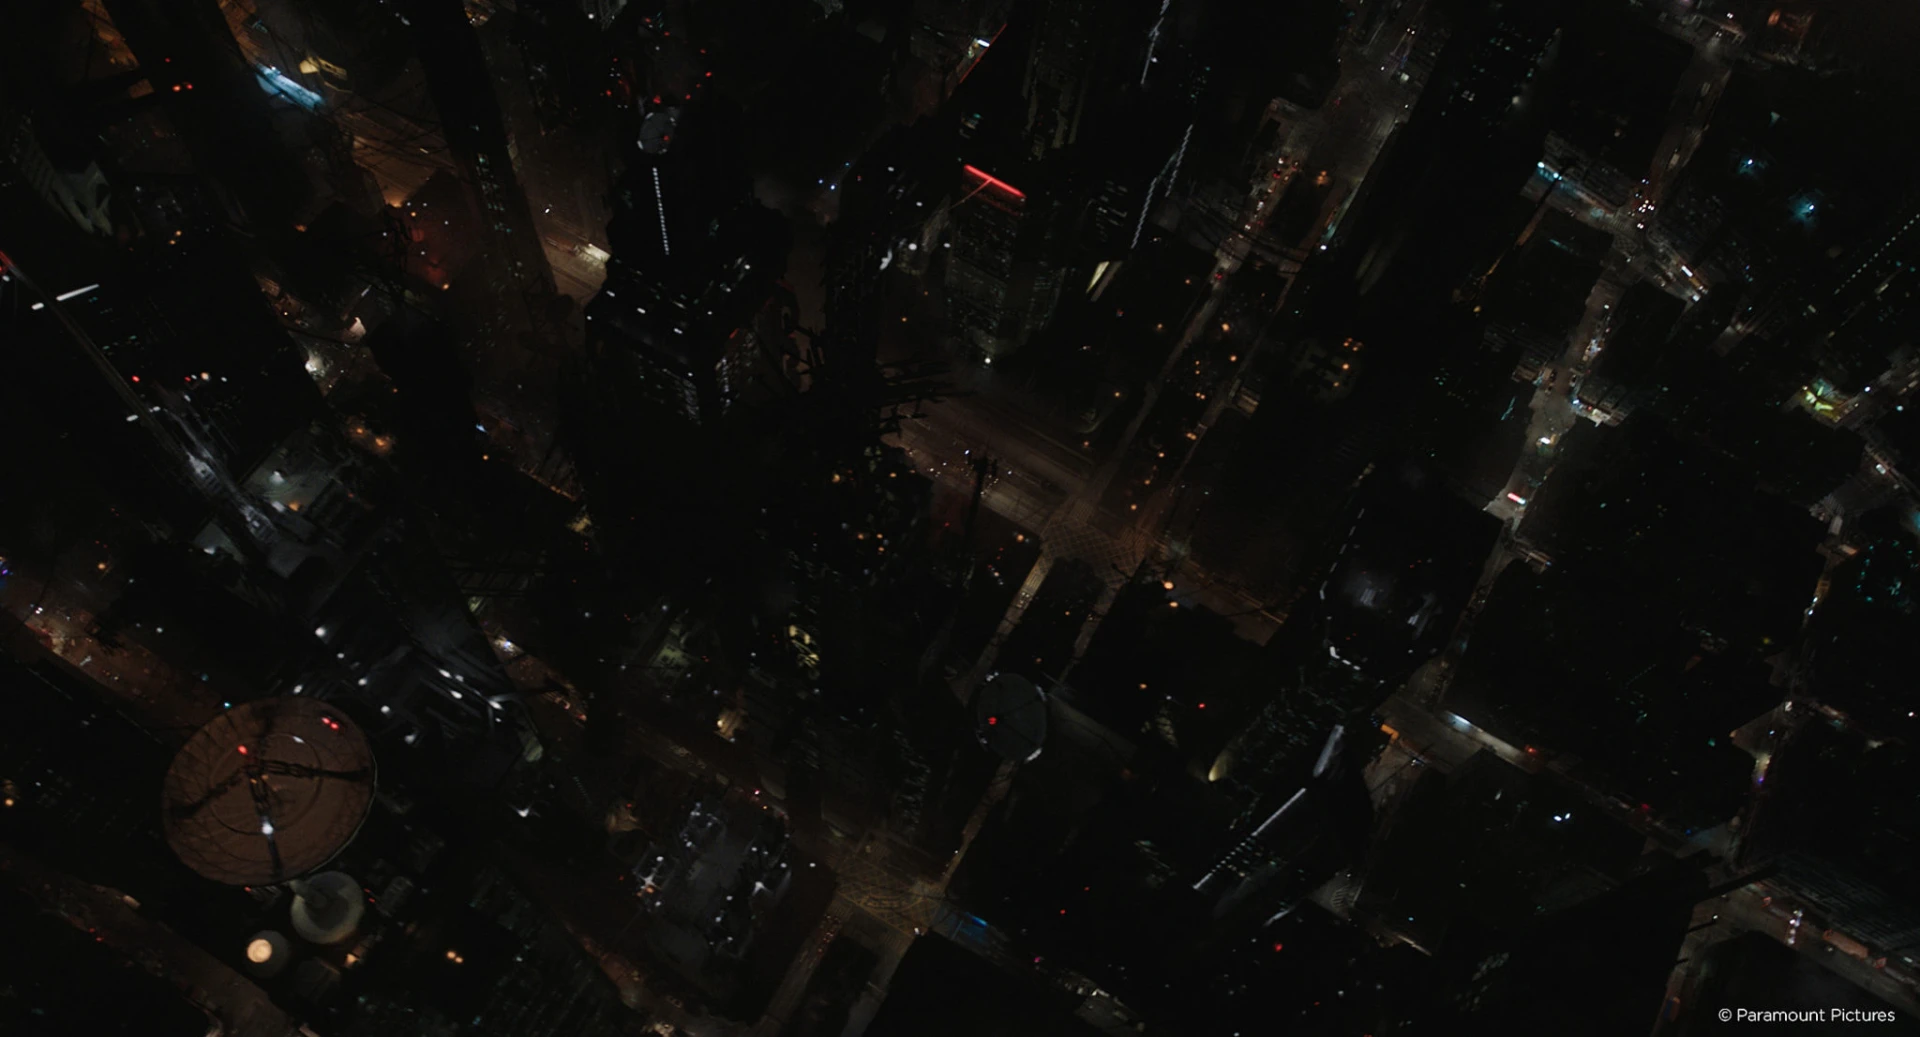 Ghost in the shell - Downtown by night, seen from above from Raynault vfx